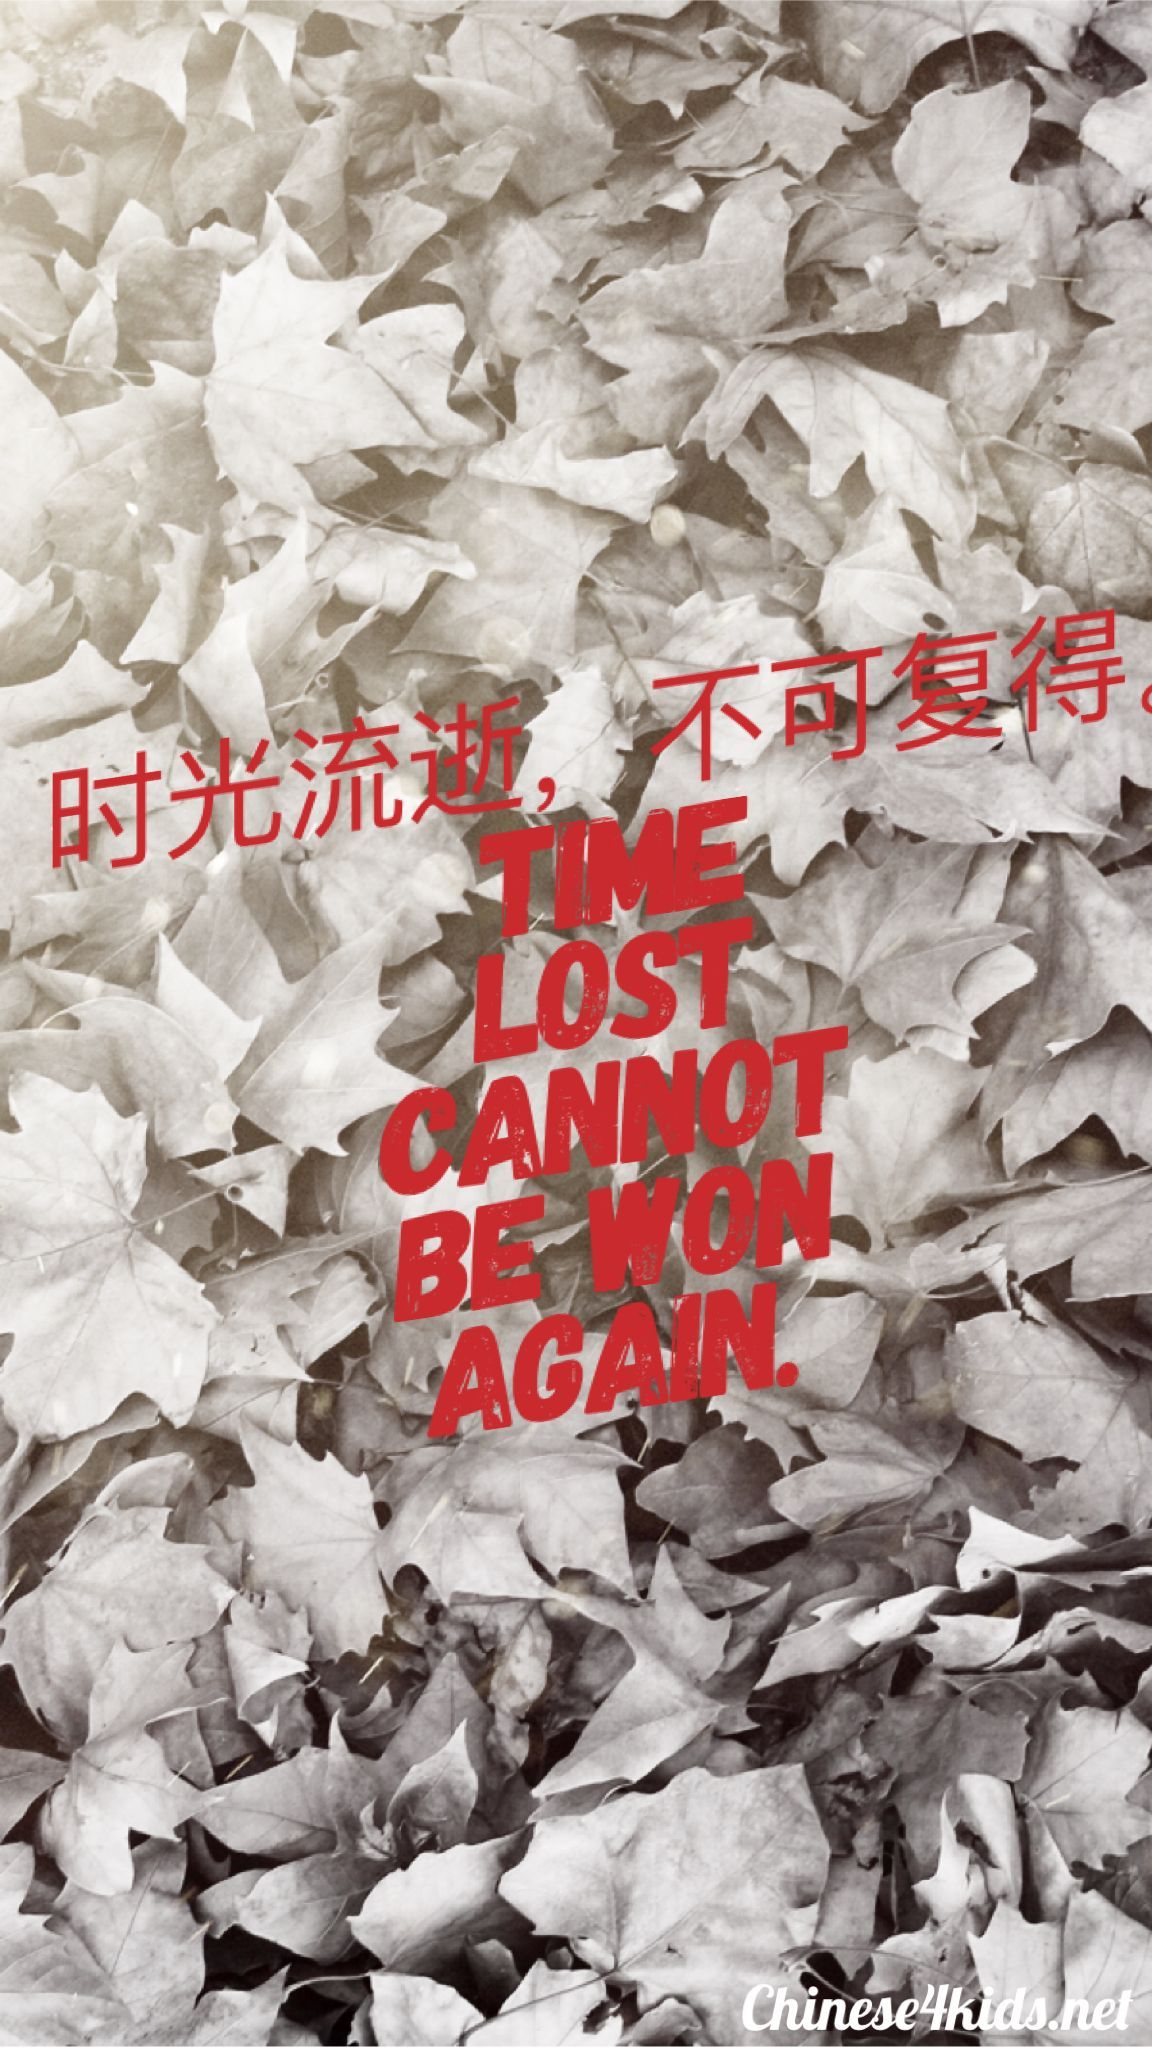 Time lost cannot be found again” Chinese Saying on time #Chinese4kids #chinesesaying #Chineseproverb #Chinese. Chinese proverbs, Proverbs on time, Chinese quotes